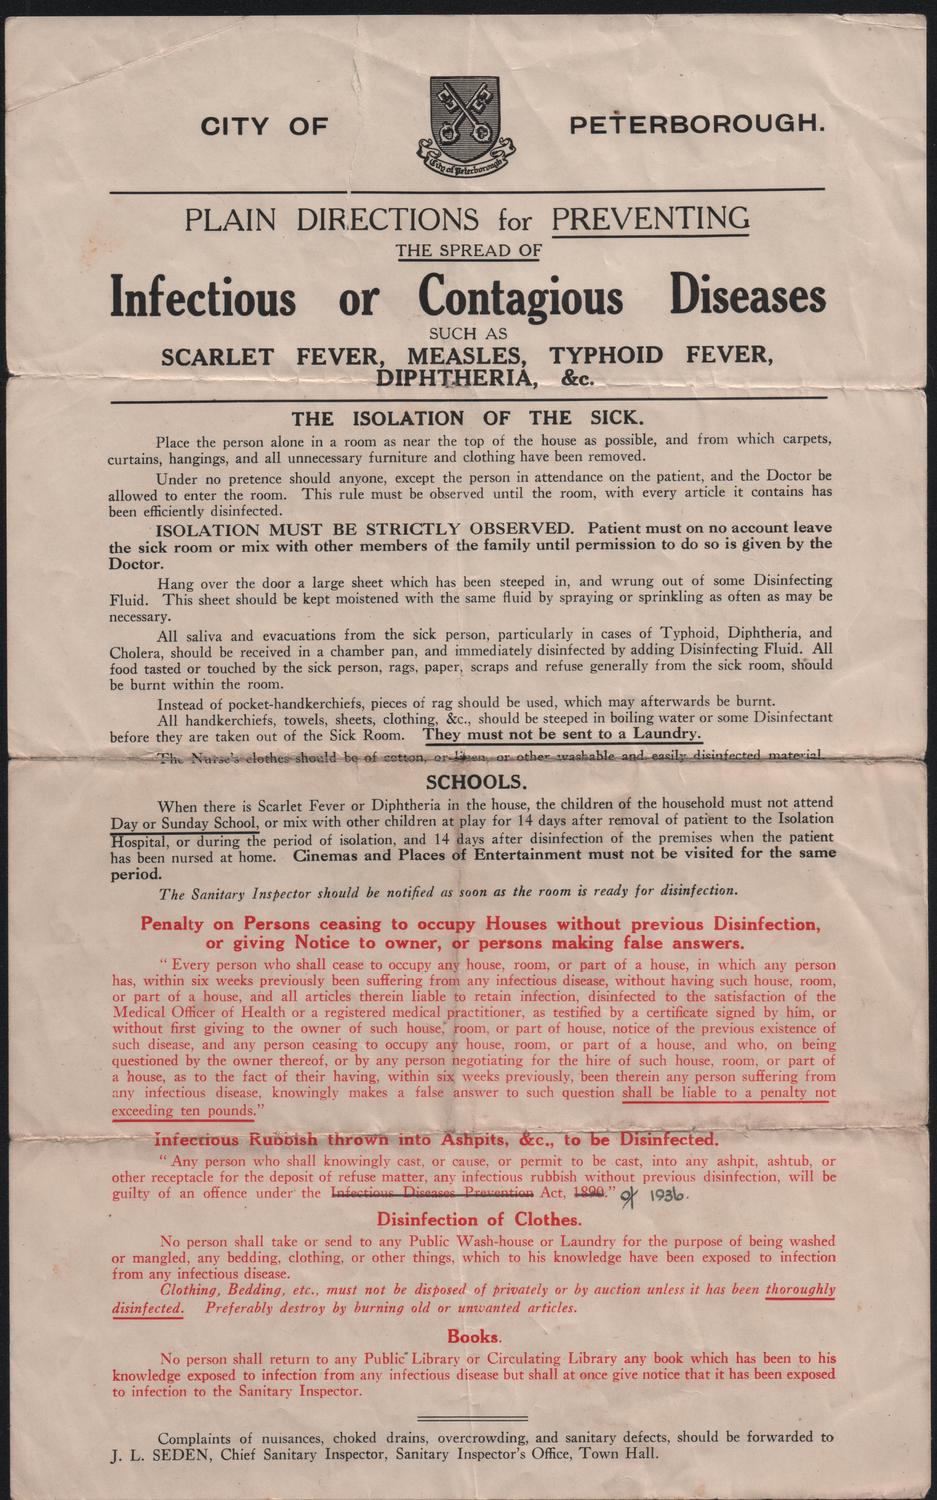 A 20th Century, City of Peteborough leaflet giving "Plain Directions for Preventing the spread of Infectious or Contagious Diseases, such as Scarlet Fever, Measles, Typhoid Fever, Diphtheria, &c."